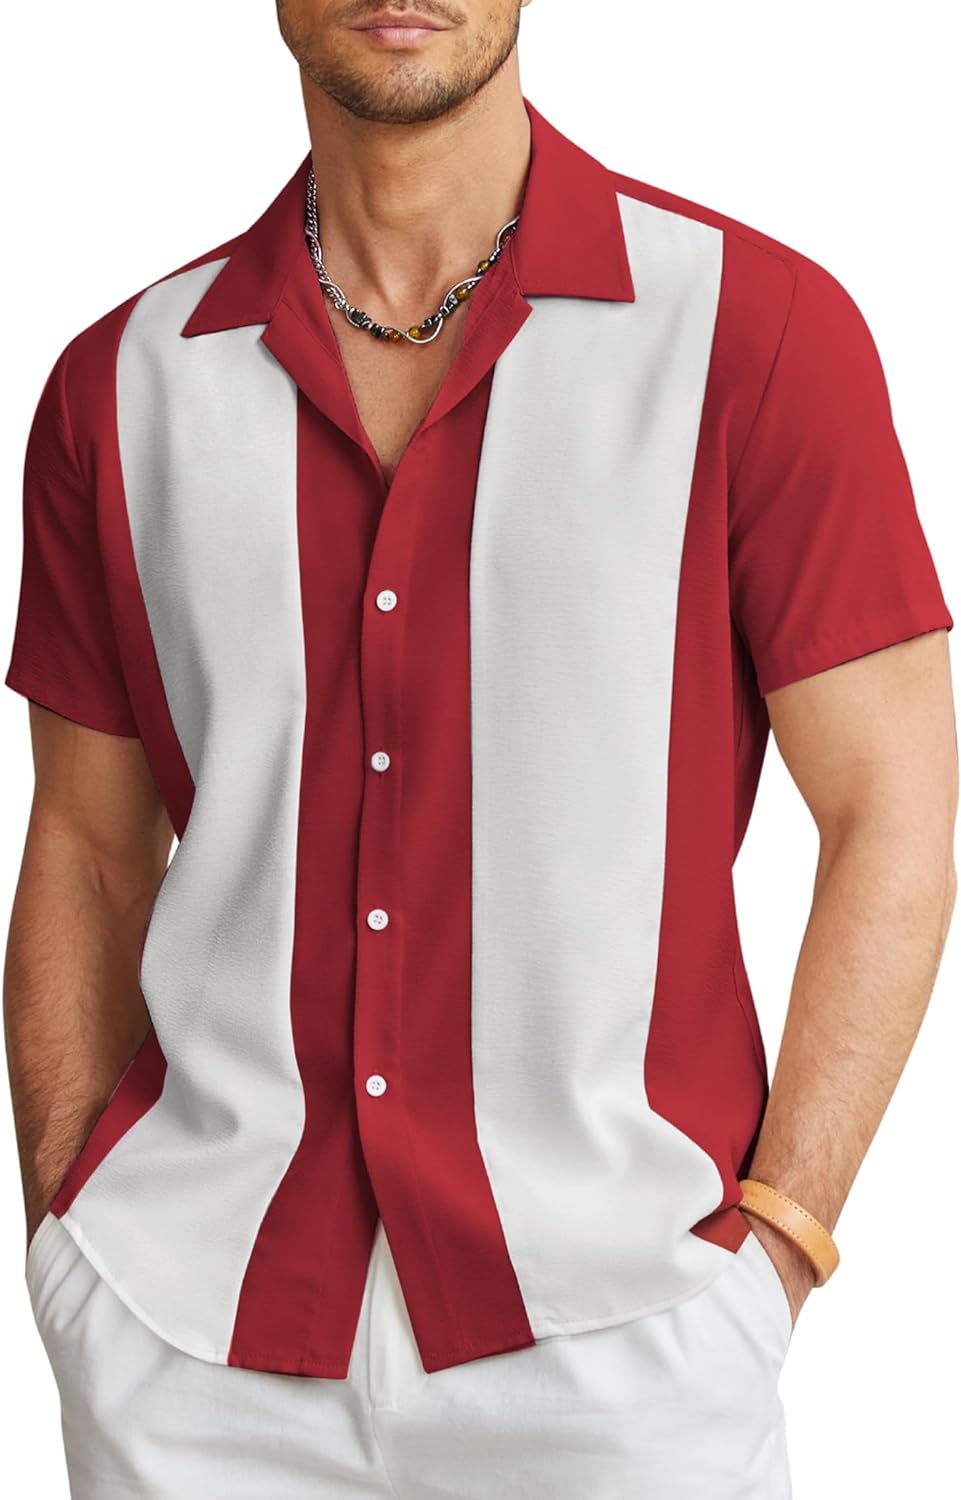 Men's Cuban Style Red/White Striped Short Sleeve Shirt